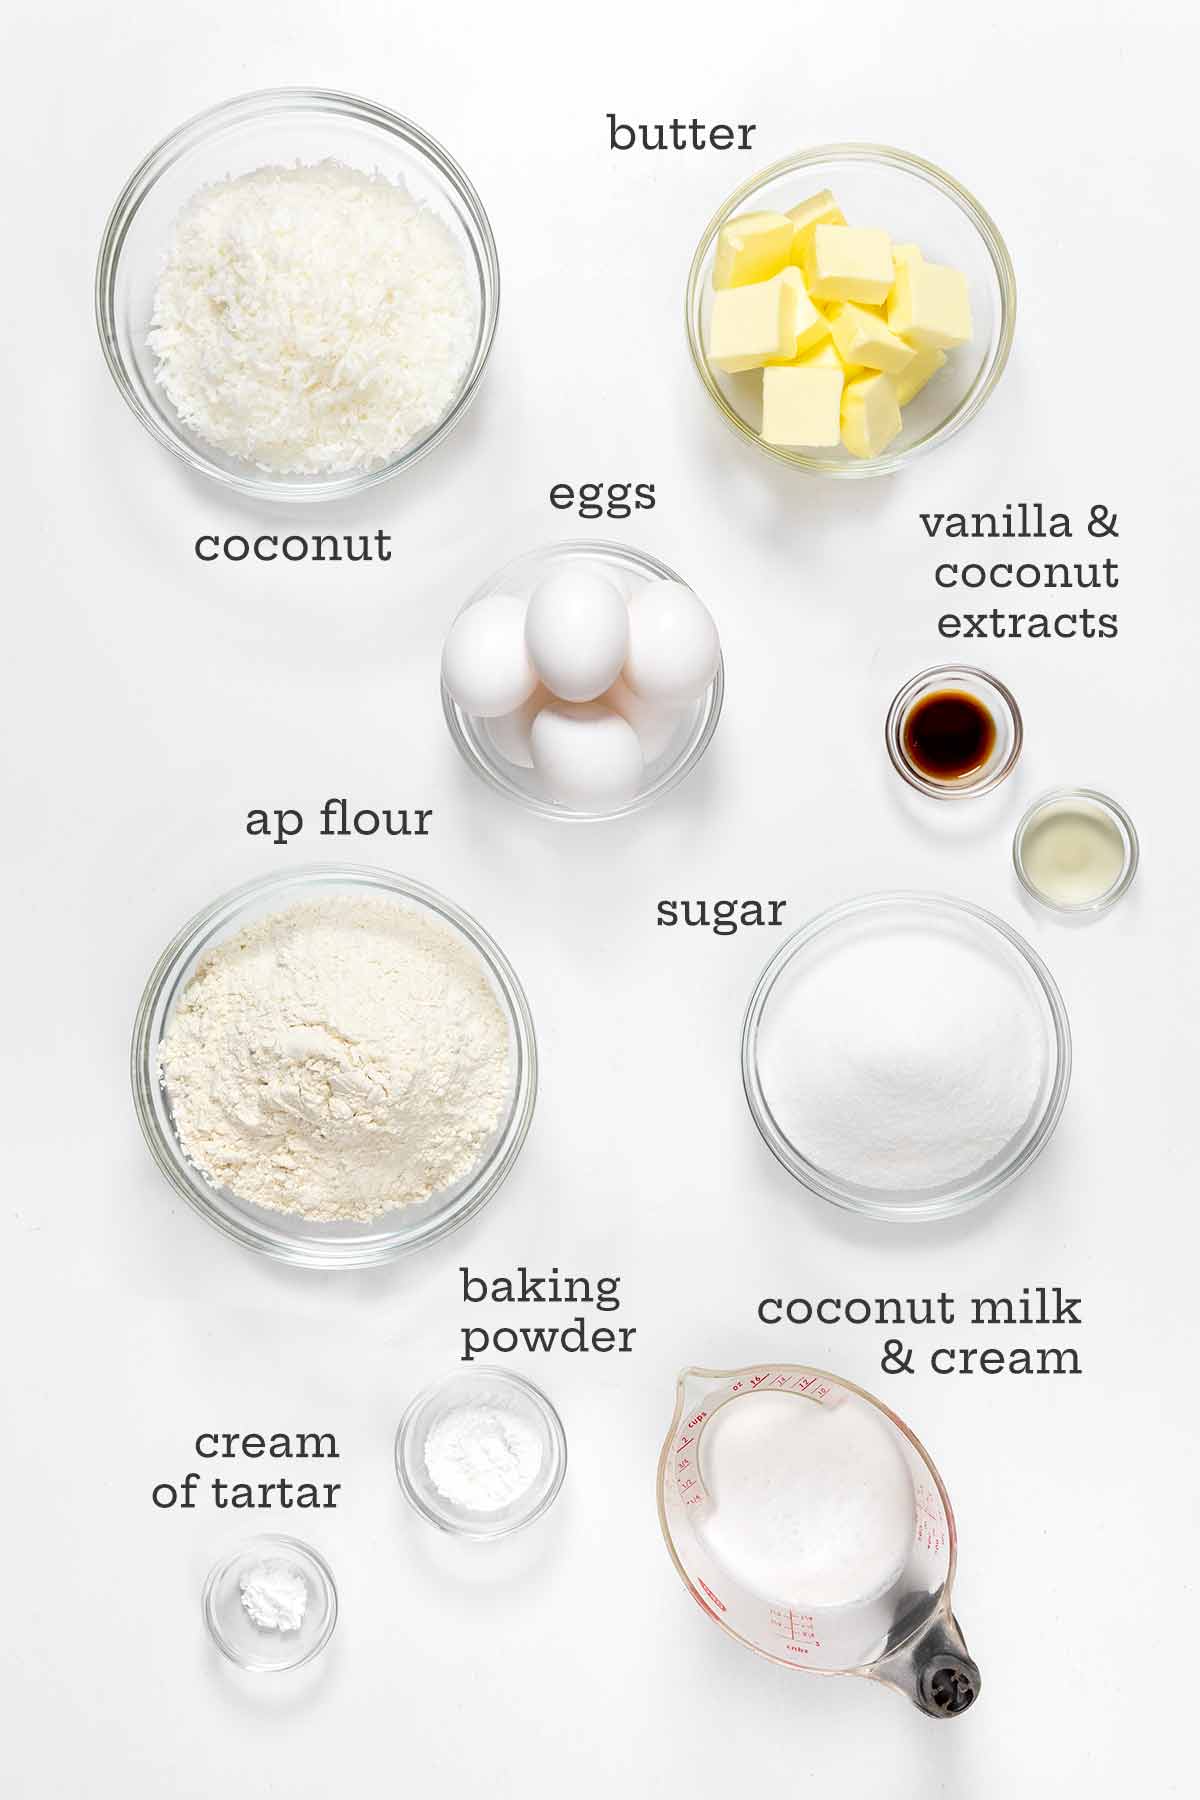 The ingredients for old-fashioned coconut cake, including bowls of coconut, butter, flour, sugar, coconut milk, and coconut cream.